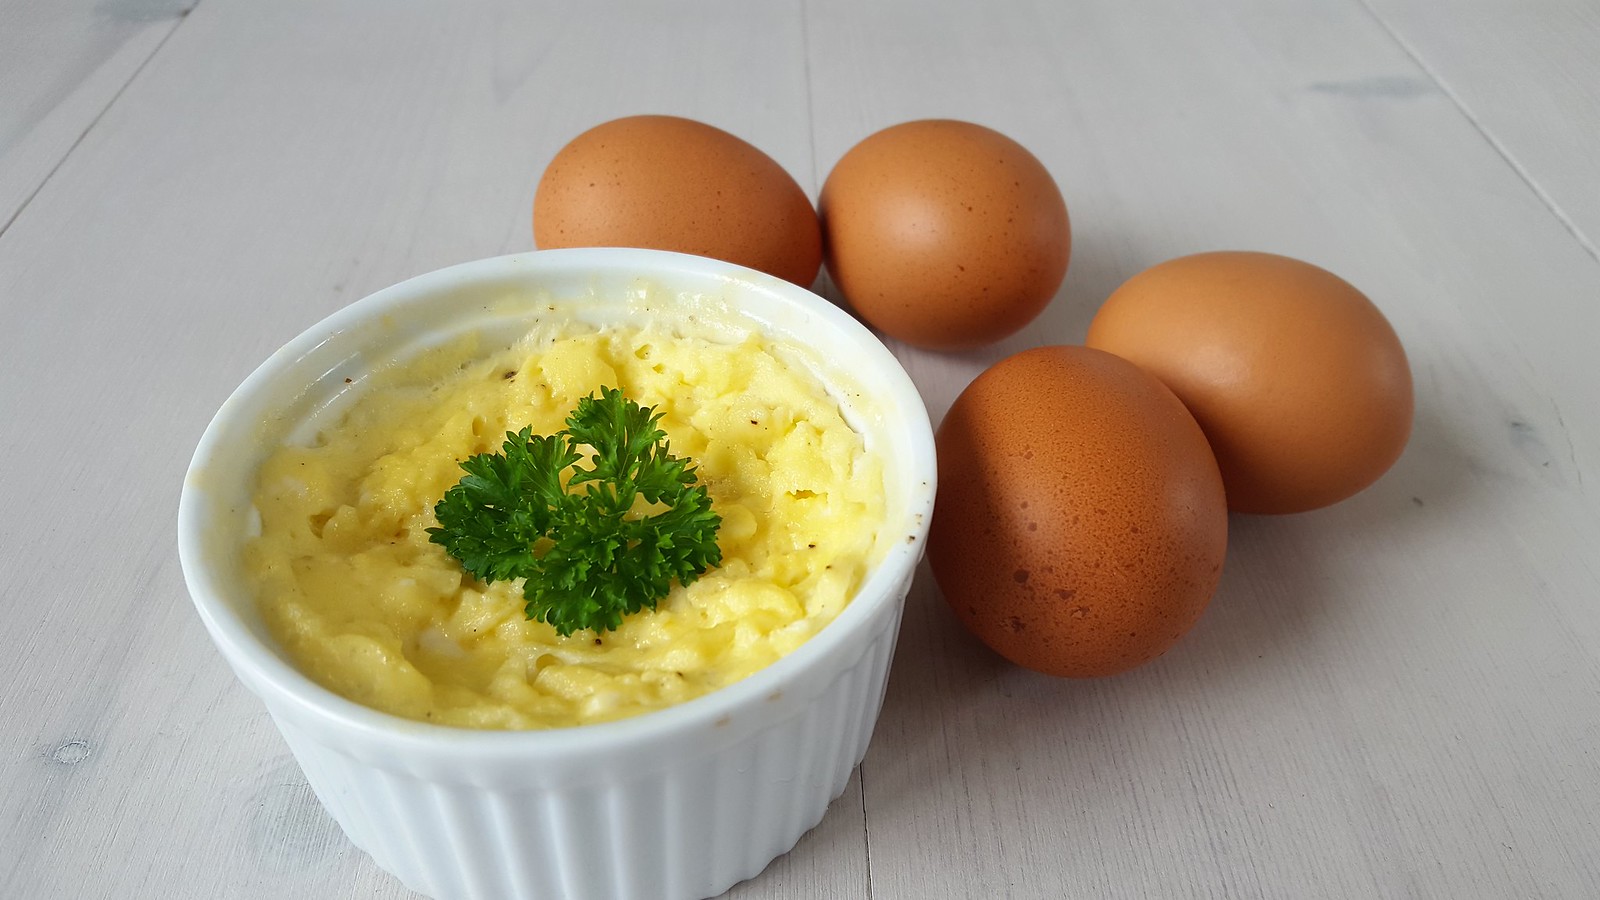 Recipe for Homemade Microwave Scrambled Eggs